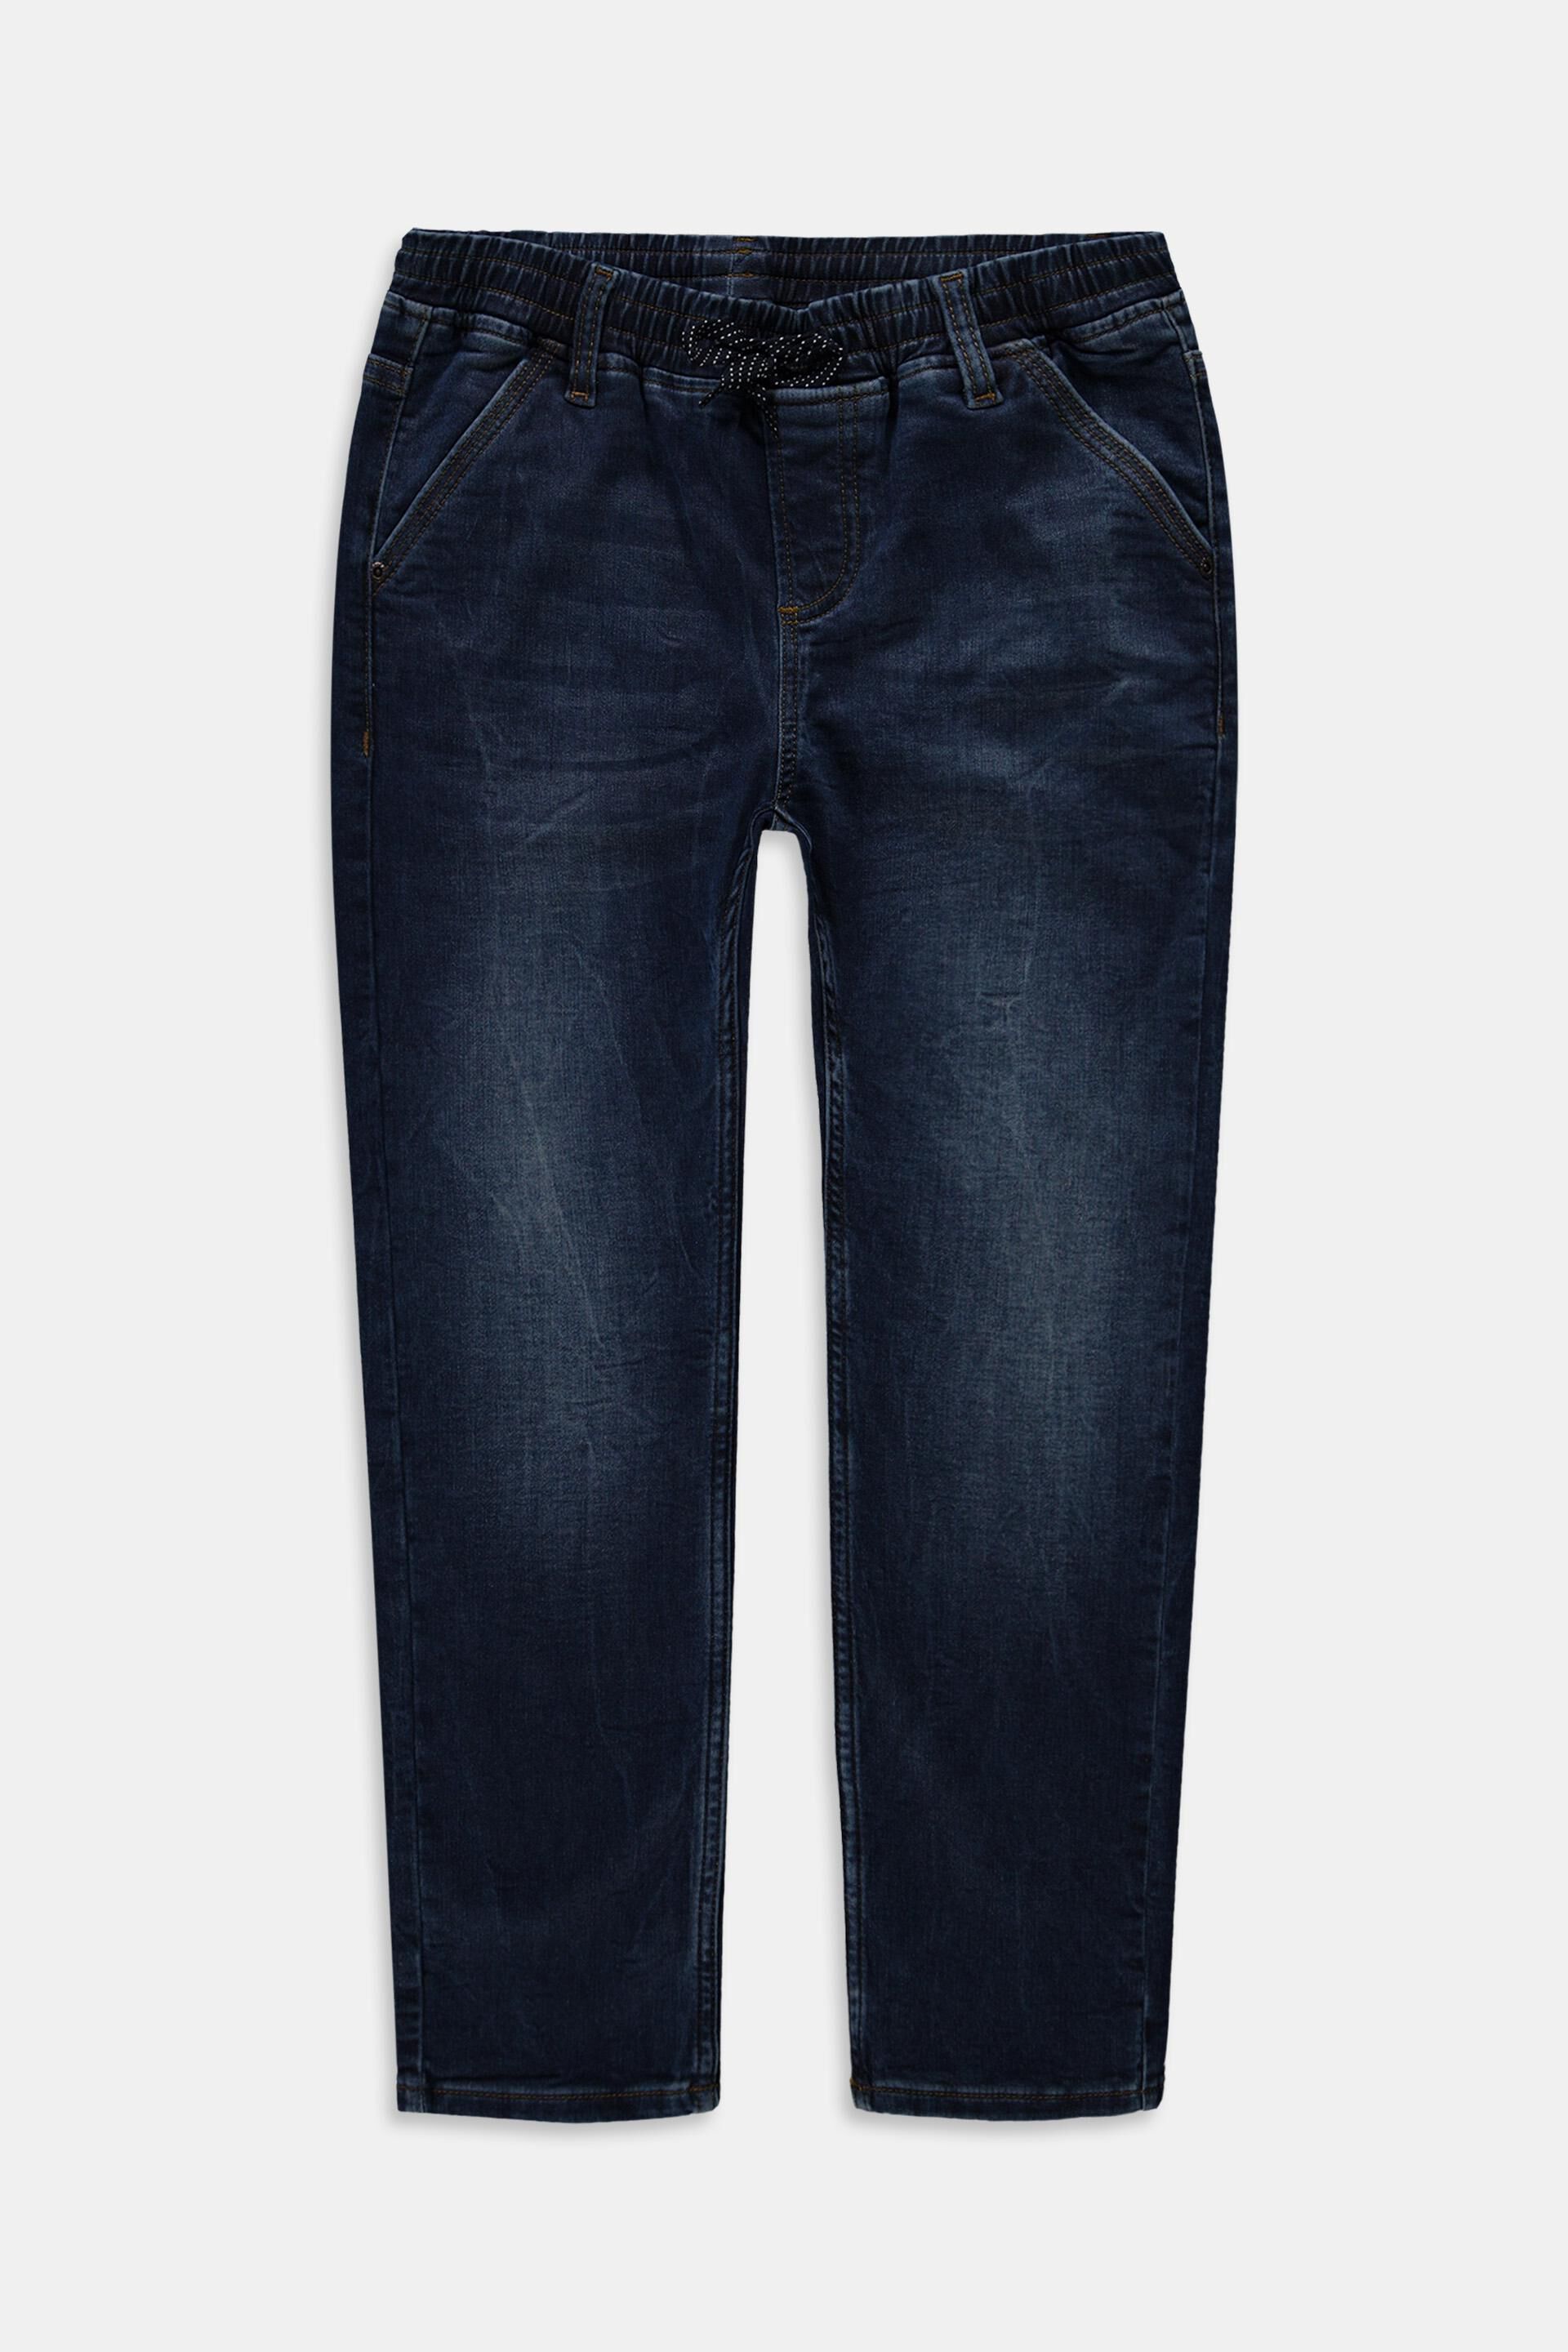 Edc By Esprit Jeans with elasticated waistband